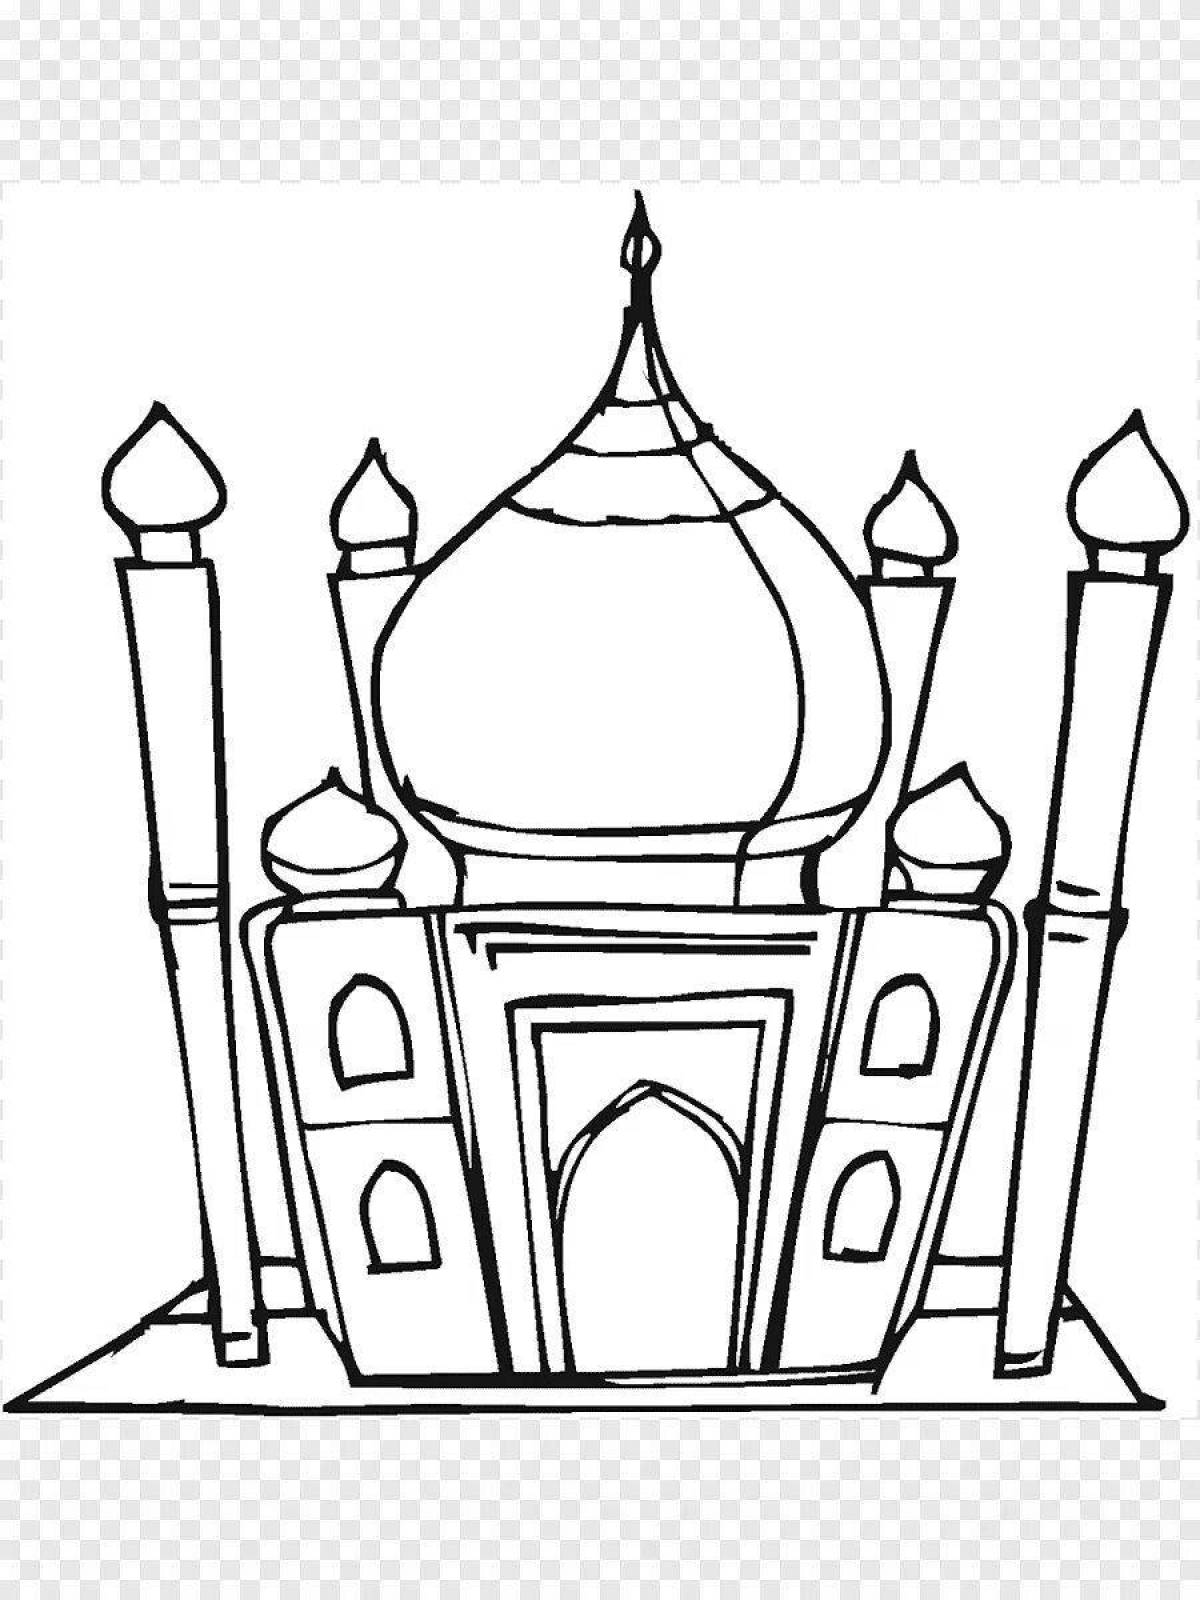 A playful Islamic coloring book for kids